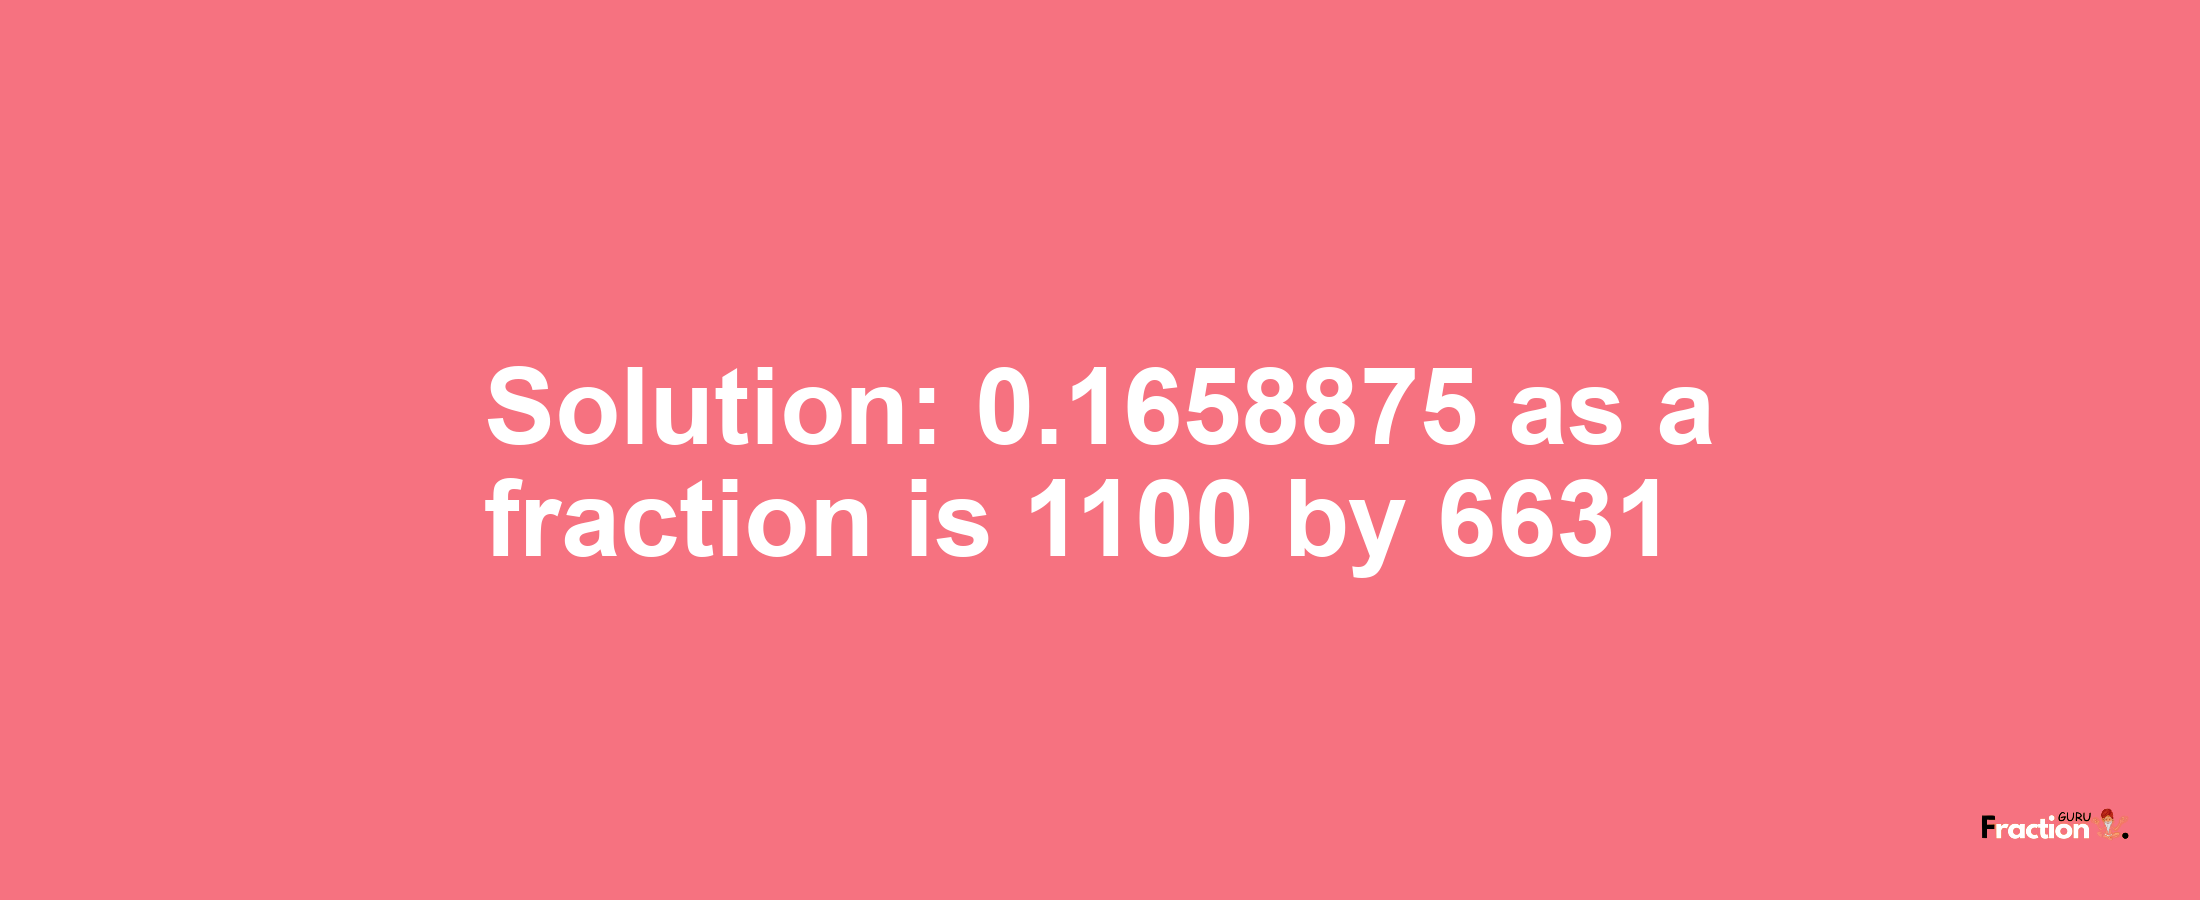 Solution:0.1658875 as a fraction is 1100/6631